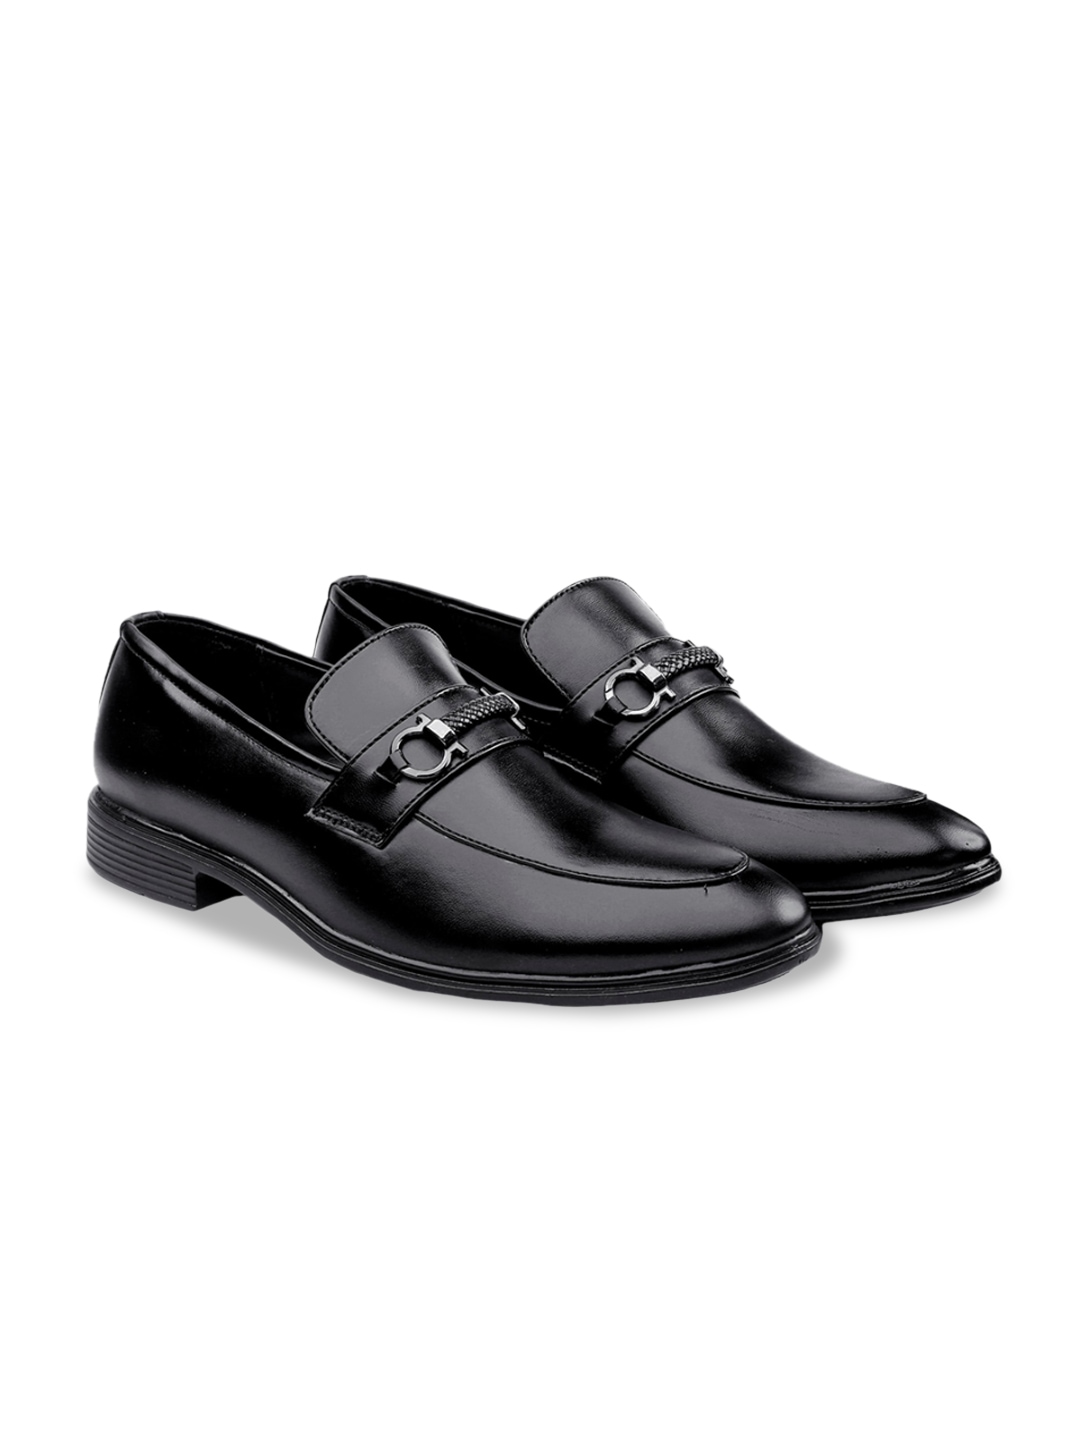 

Bxxy Men Round Toe Formal Loafers, Black